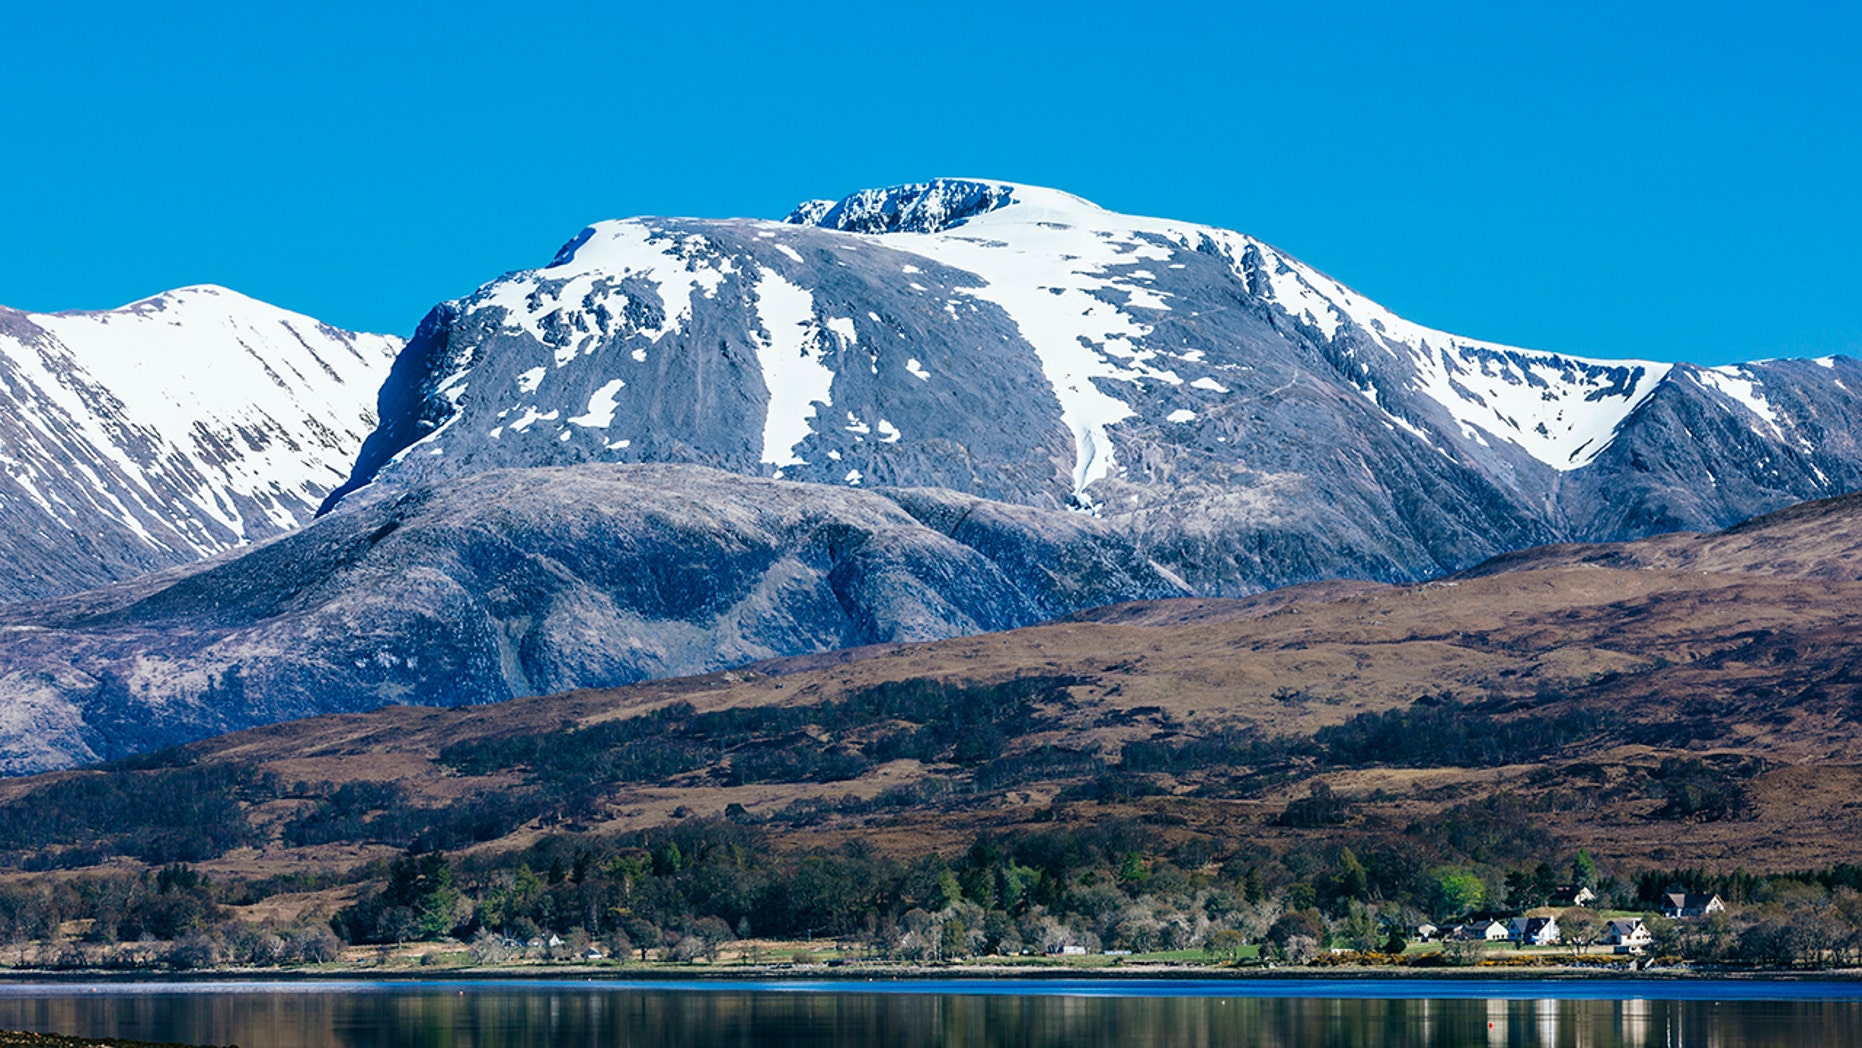 Two climbers died after an avalanche on Ben Nevis, the highest peak in Scot...